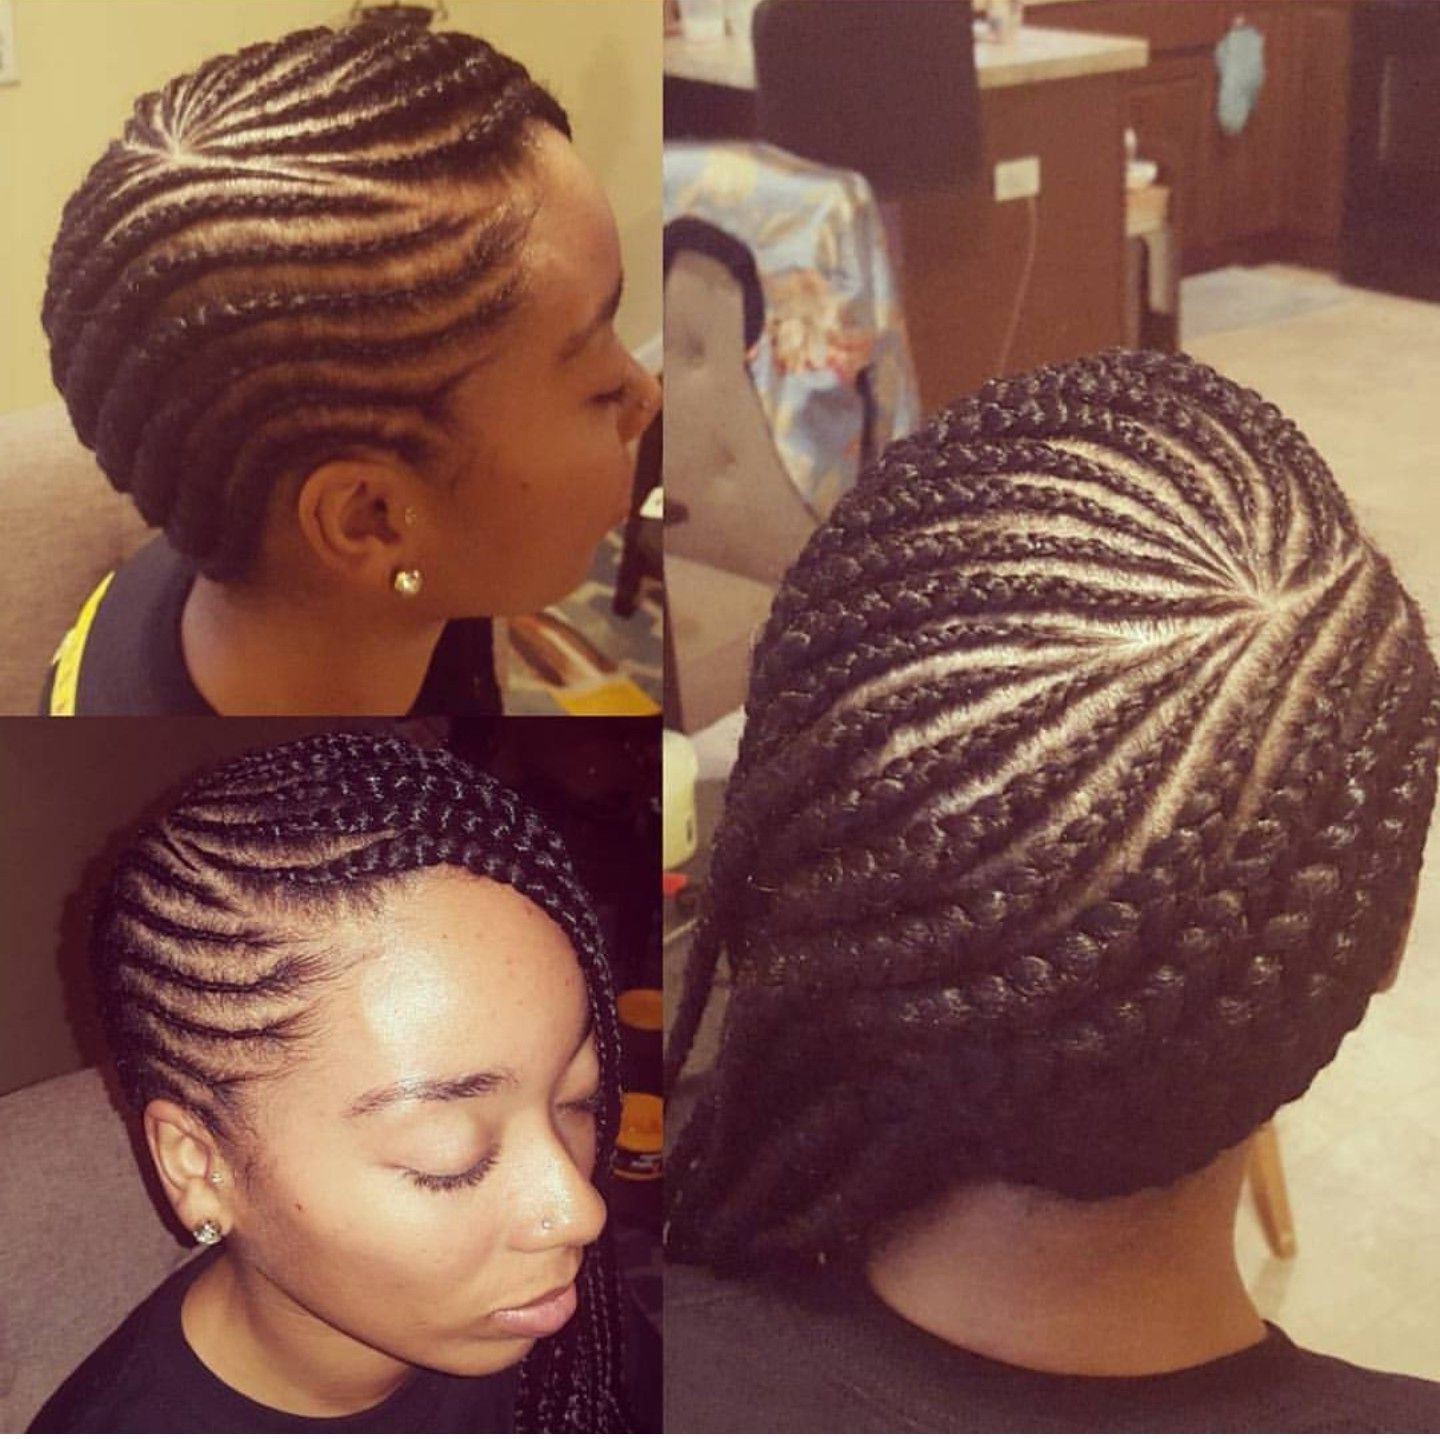 2019 Straight Backs Braided Hairstyles Throughout Hairstyles : All Back Cornrow Hairstyles Most Inspiring (View 9 of 20)